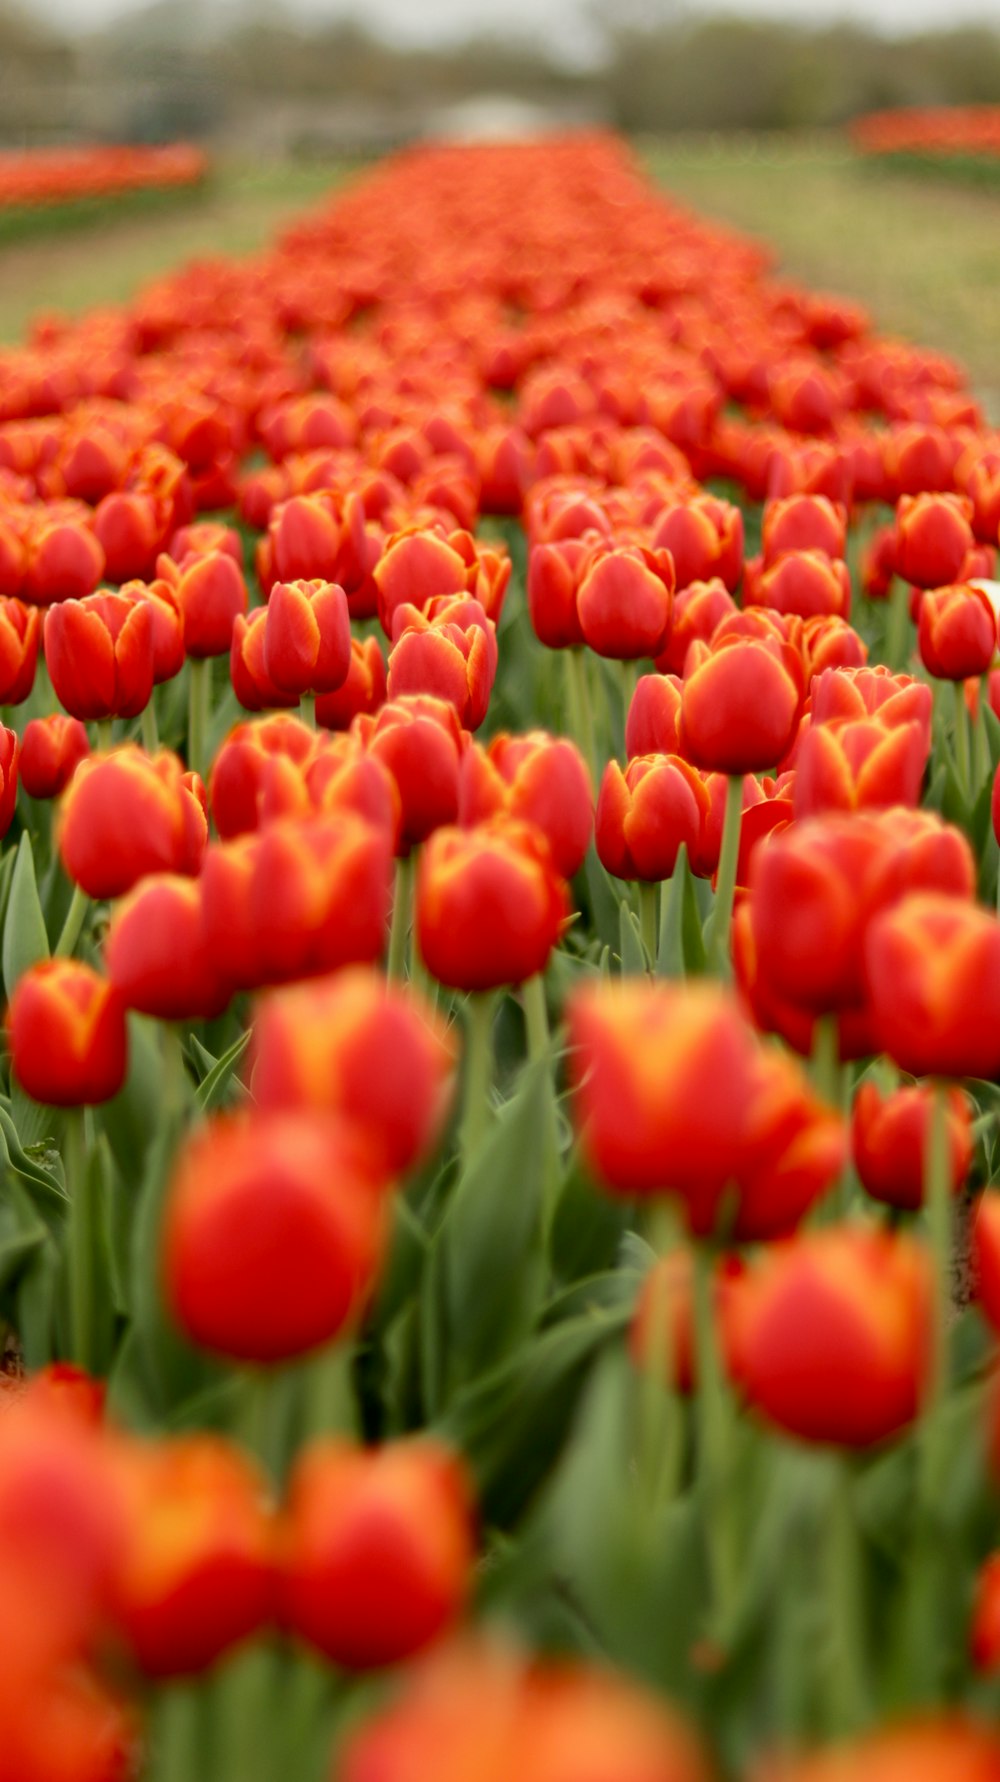 a field full of red and orange tulips